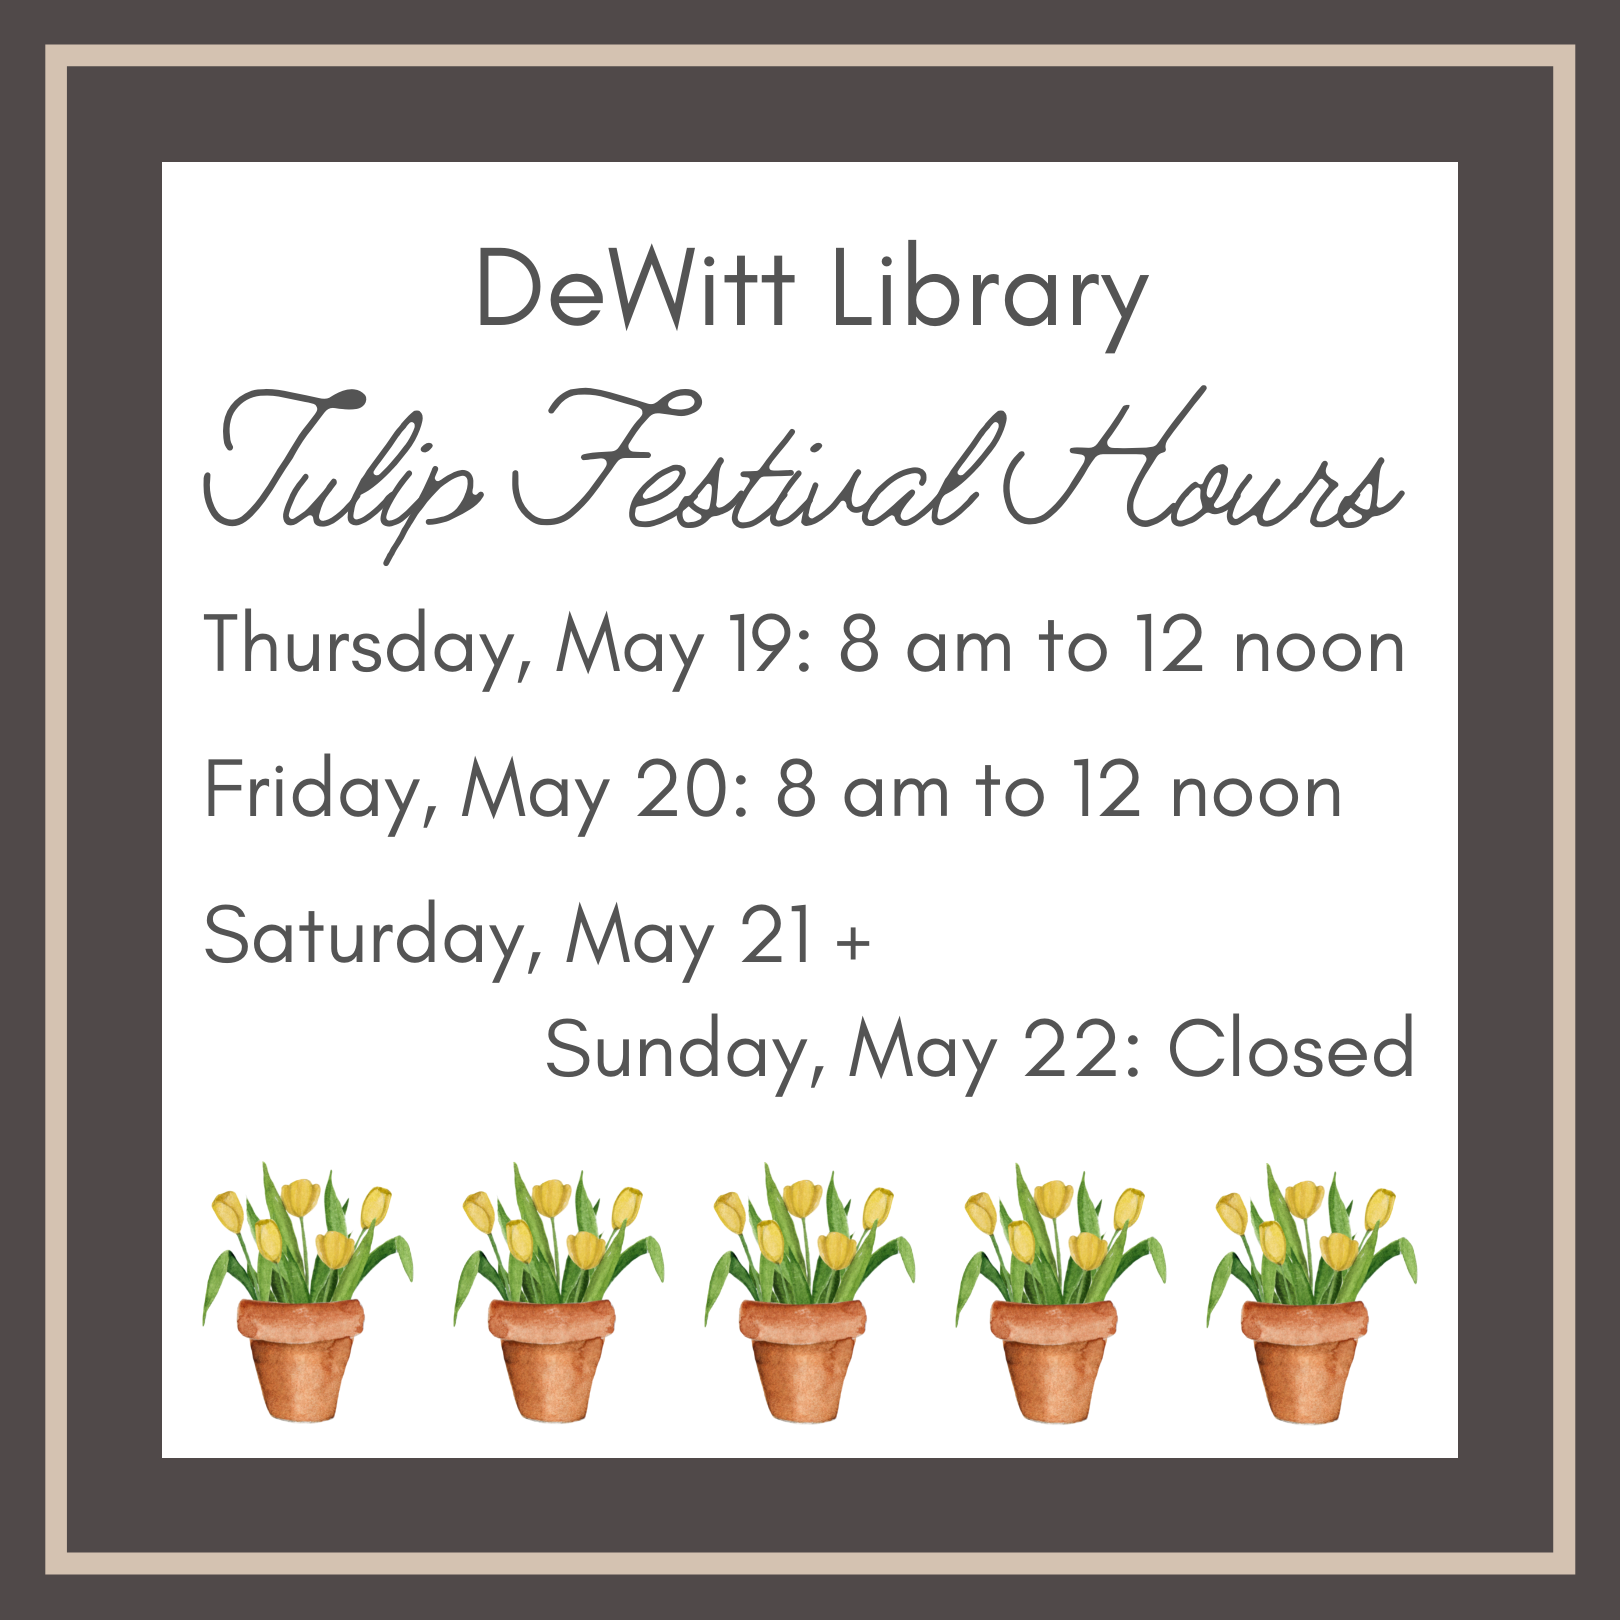 DeWitt Library - Tulip Festival Hours - Thursday, May 19: 8 am to 12 noon; Friday, May 20: 8 am to 12 noon; Saturday, May 21 +  Sunday, May 22: Closed